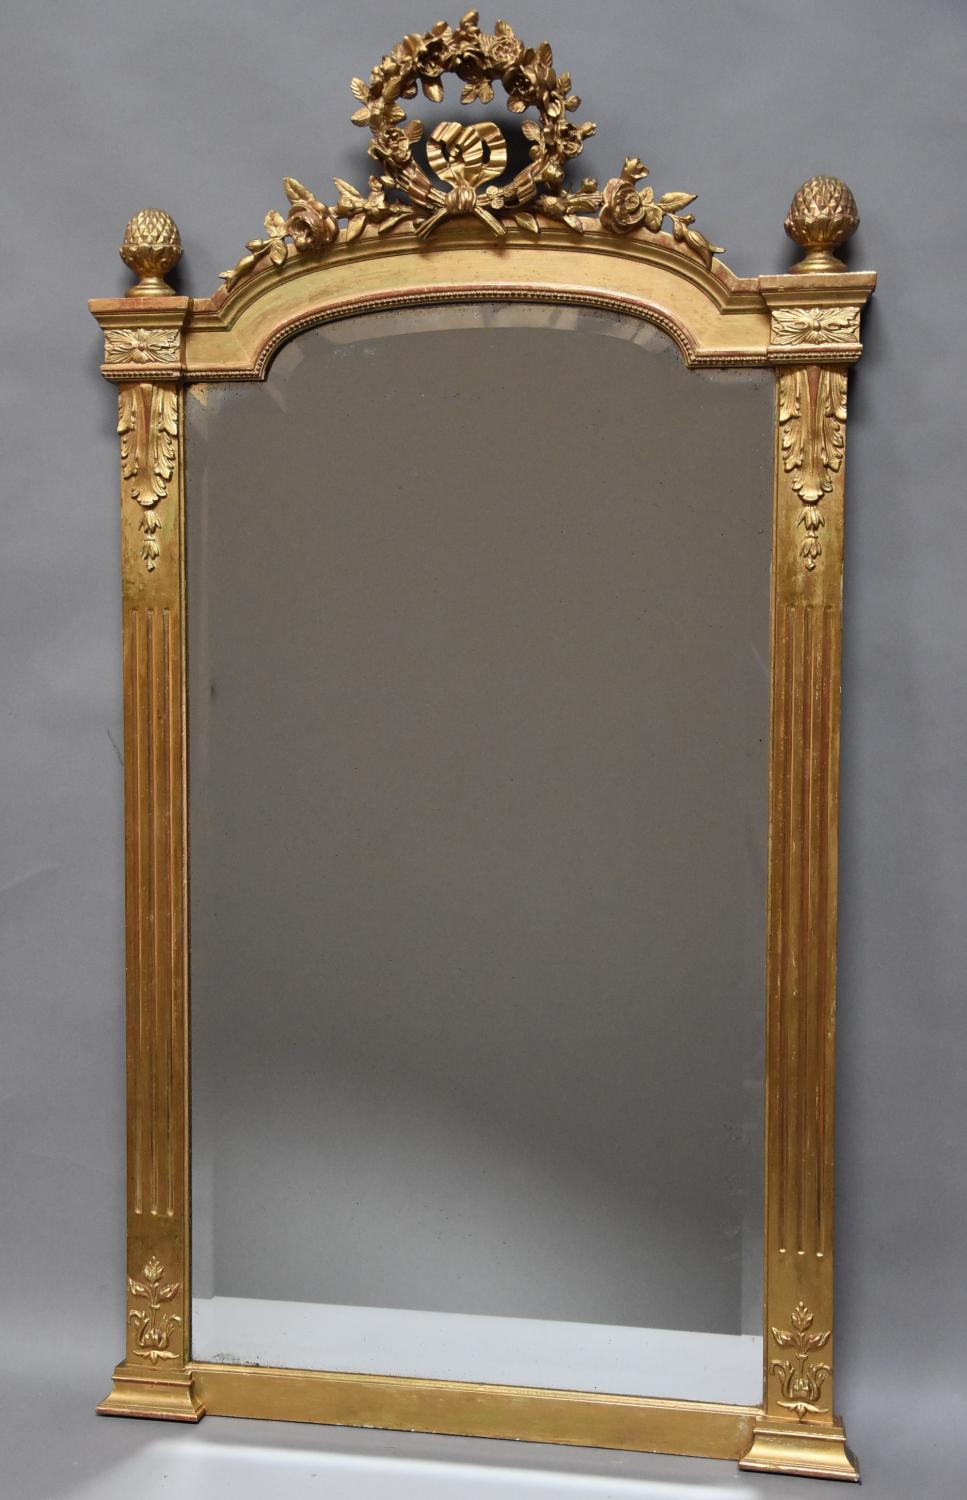 Late 19th century French gilt mirror